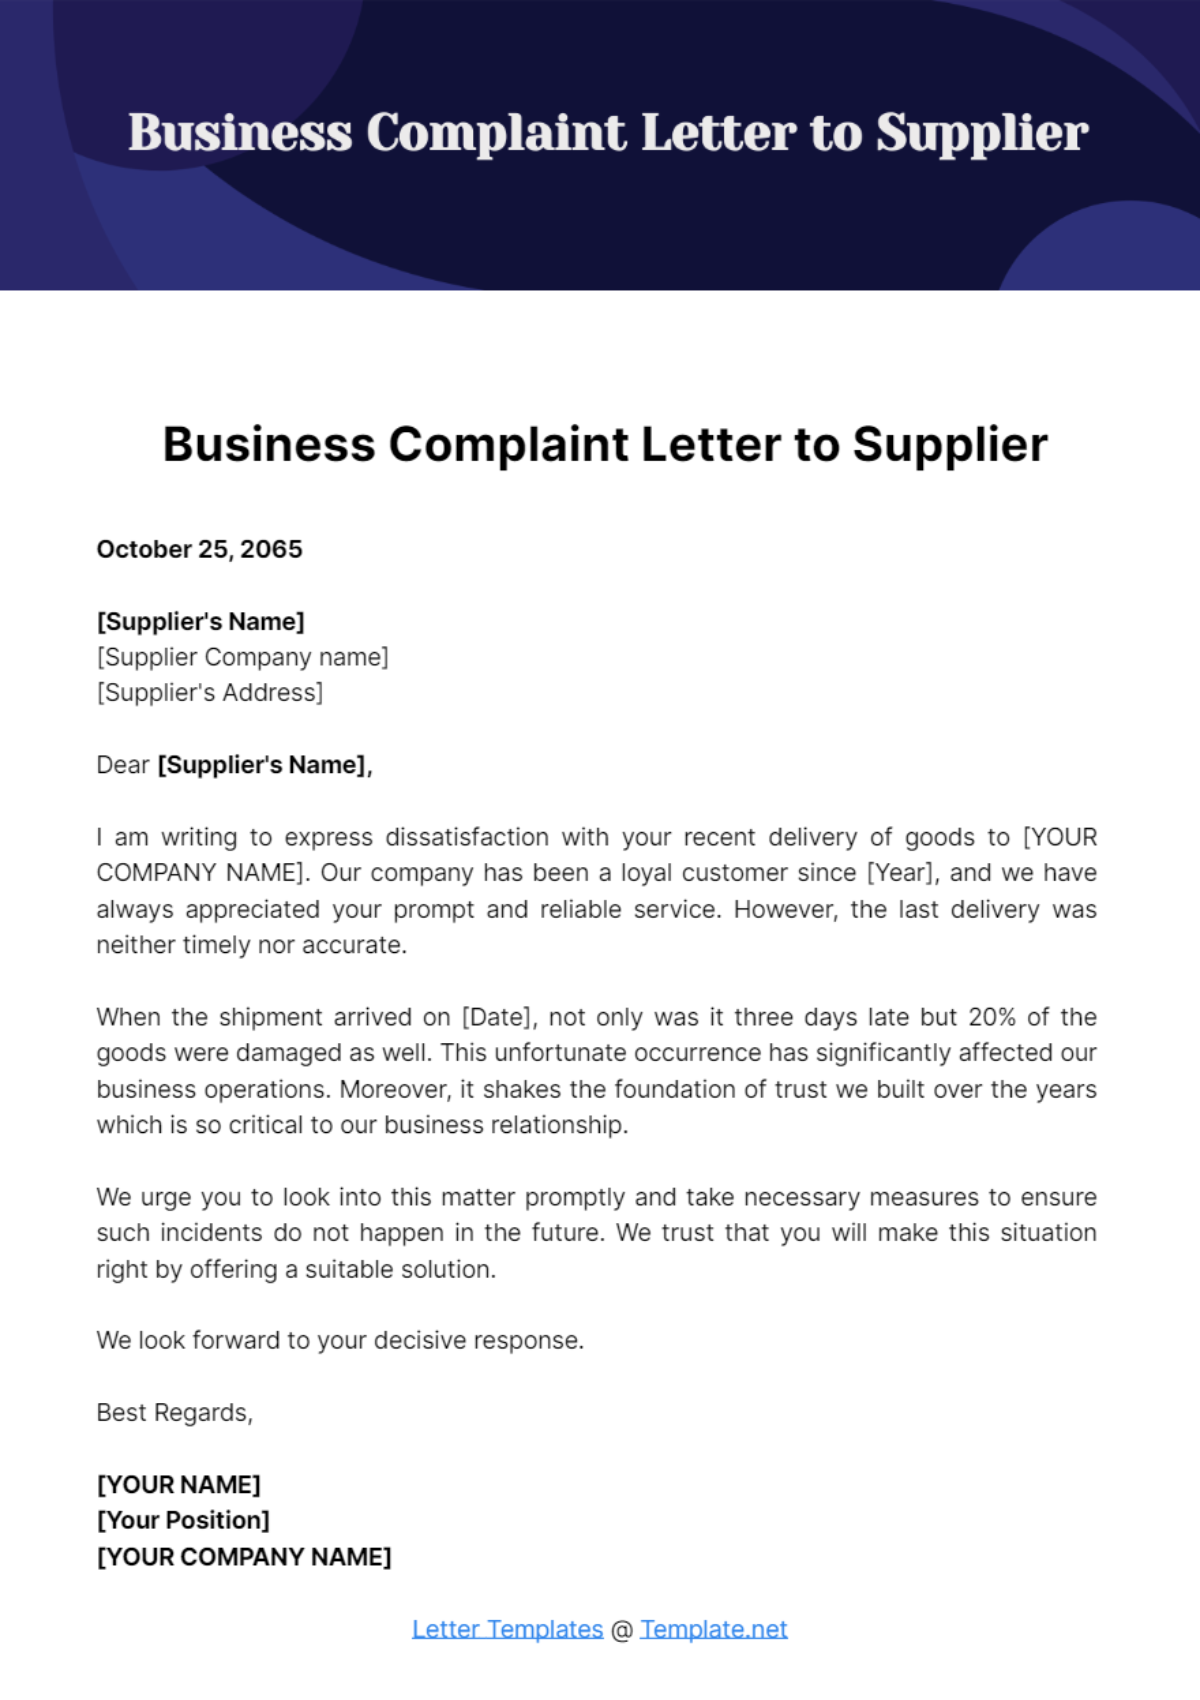 Business Complaint Letter to Supplier Template